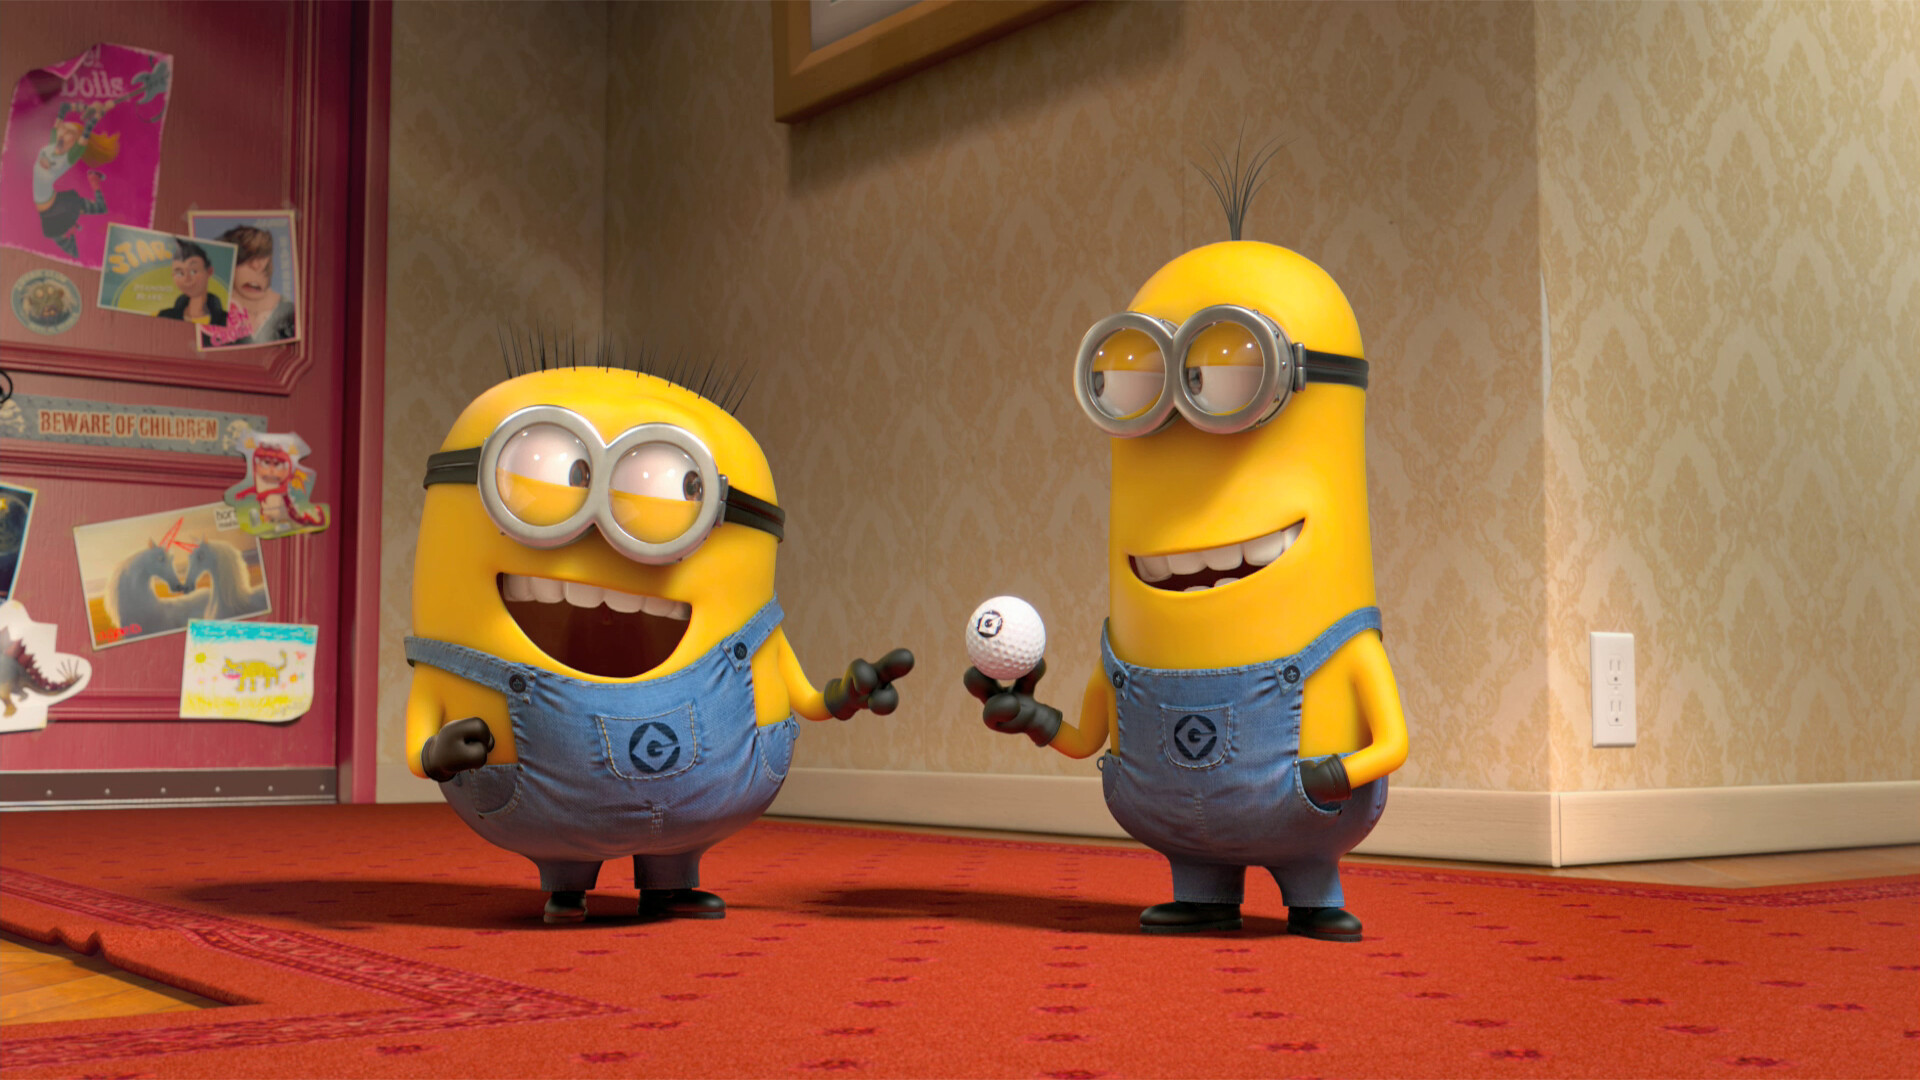 Despicable Me: Kevin and Jerry, Minions, A 2013 American computer-animated comedy film. 1920x1080 Full HD Background.